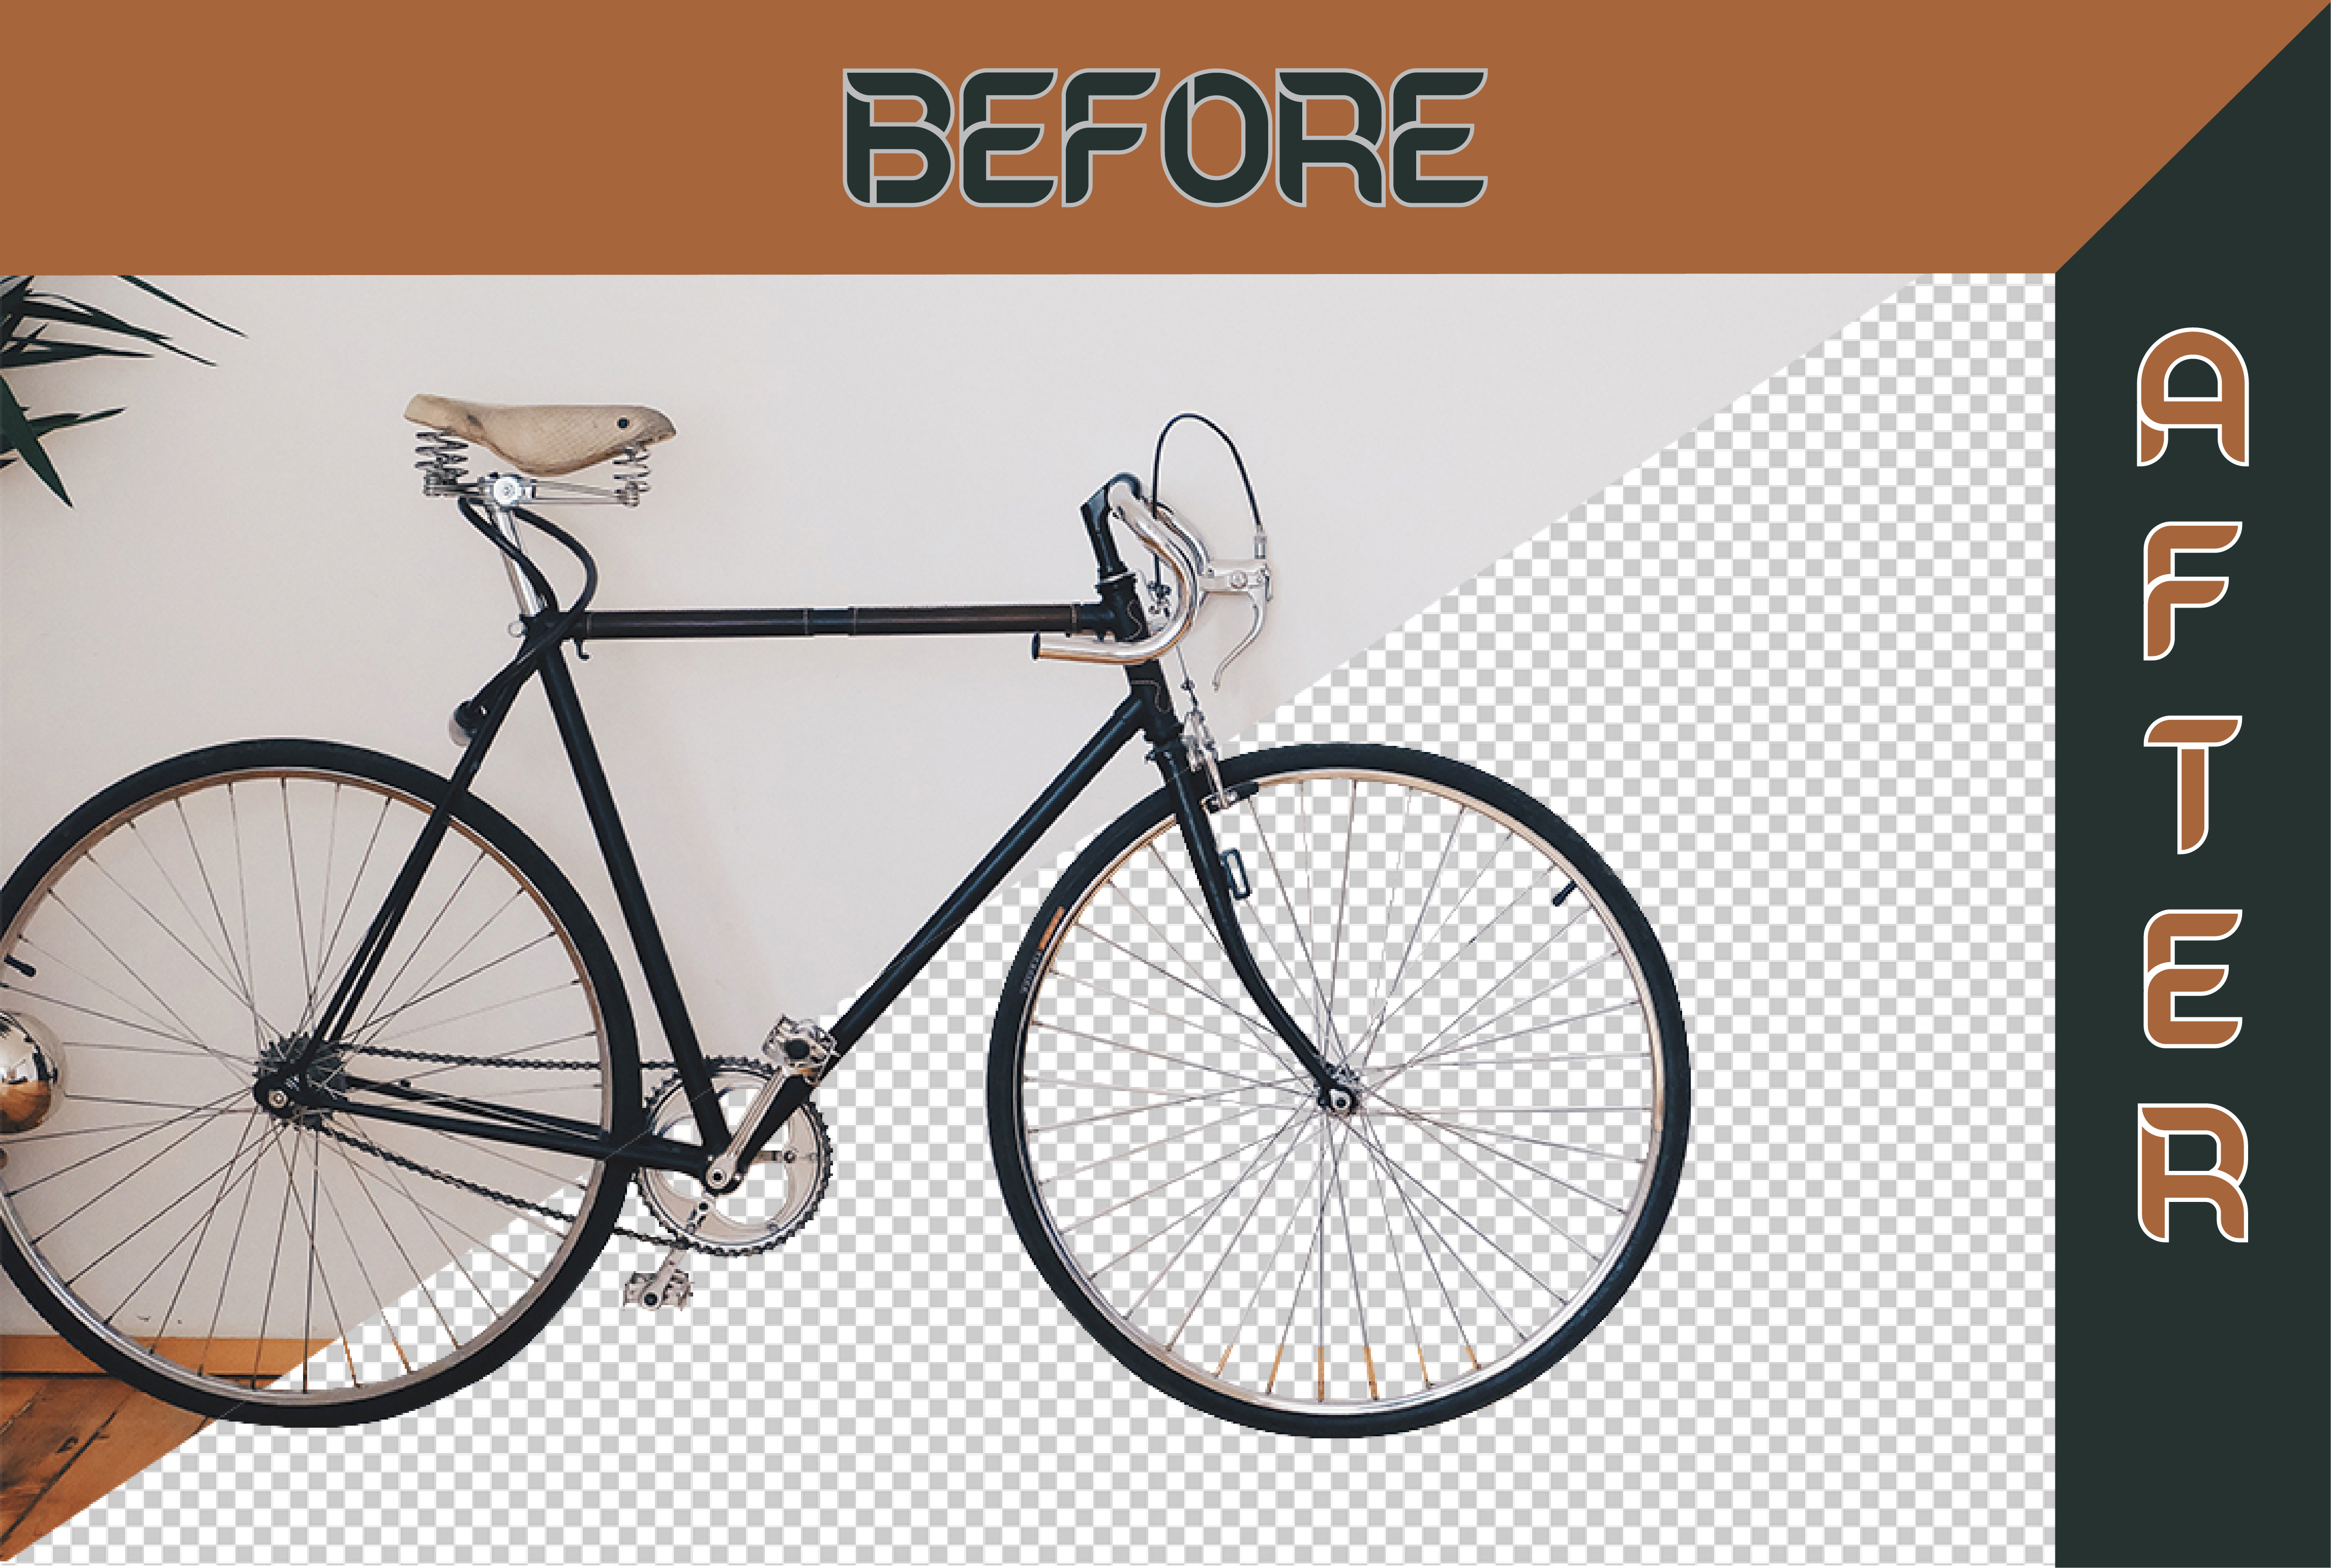 I will do background removal, product image editing, and retouching ASAP